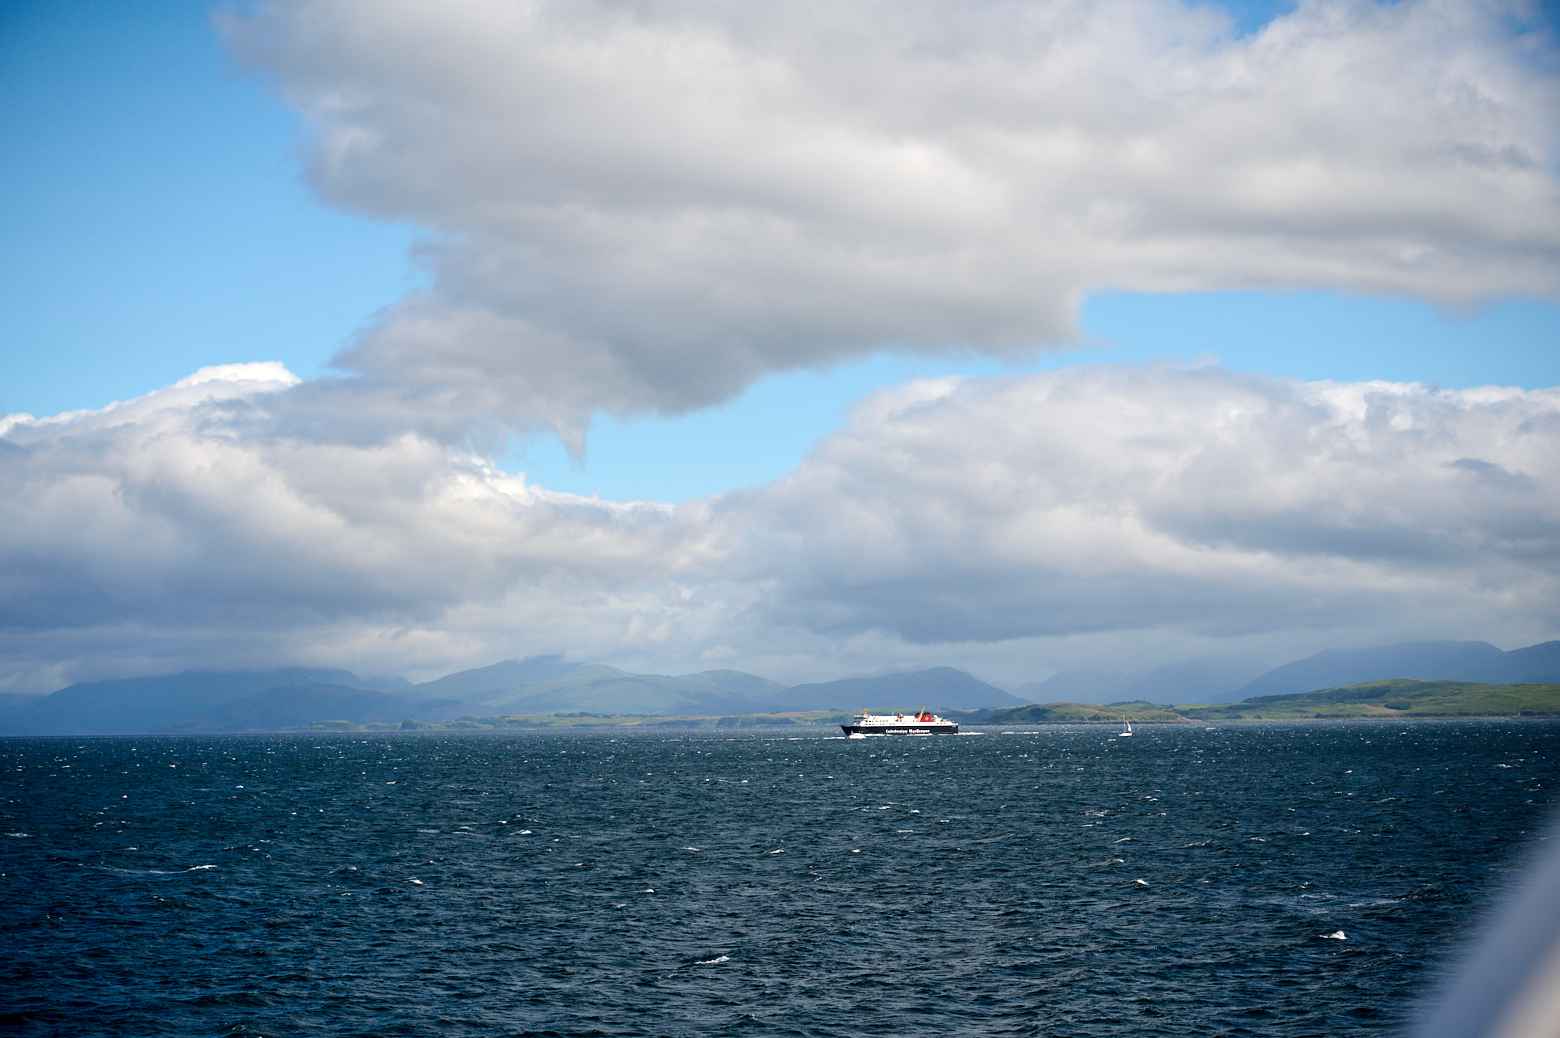 Taking the ferry back to Oban and crossing by the Isle of Mull.